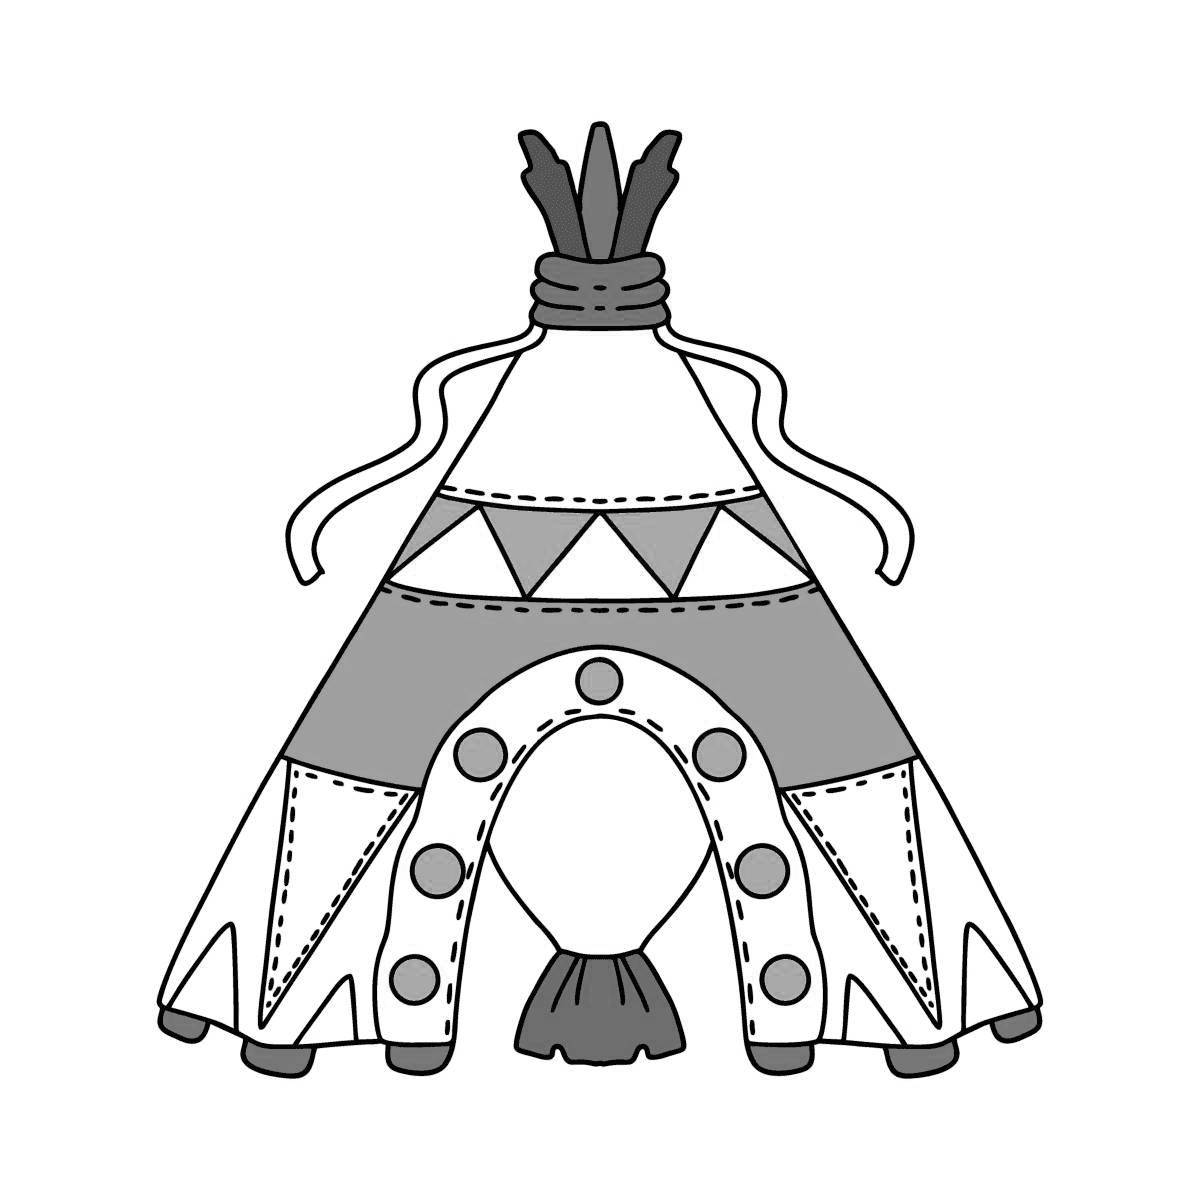 Exquisite wigwam coloring page